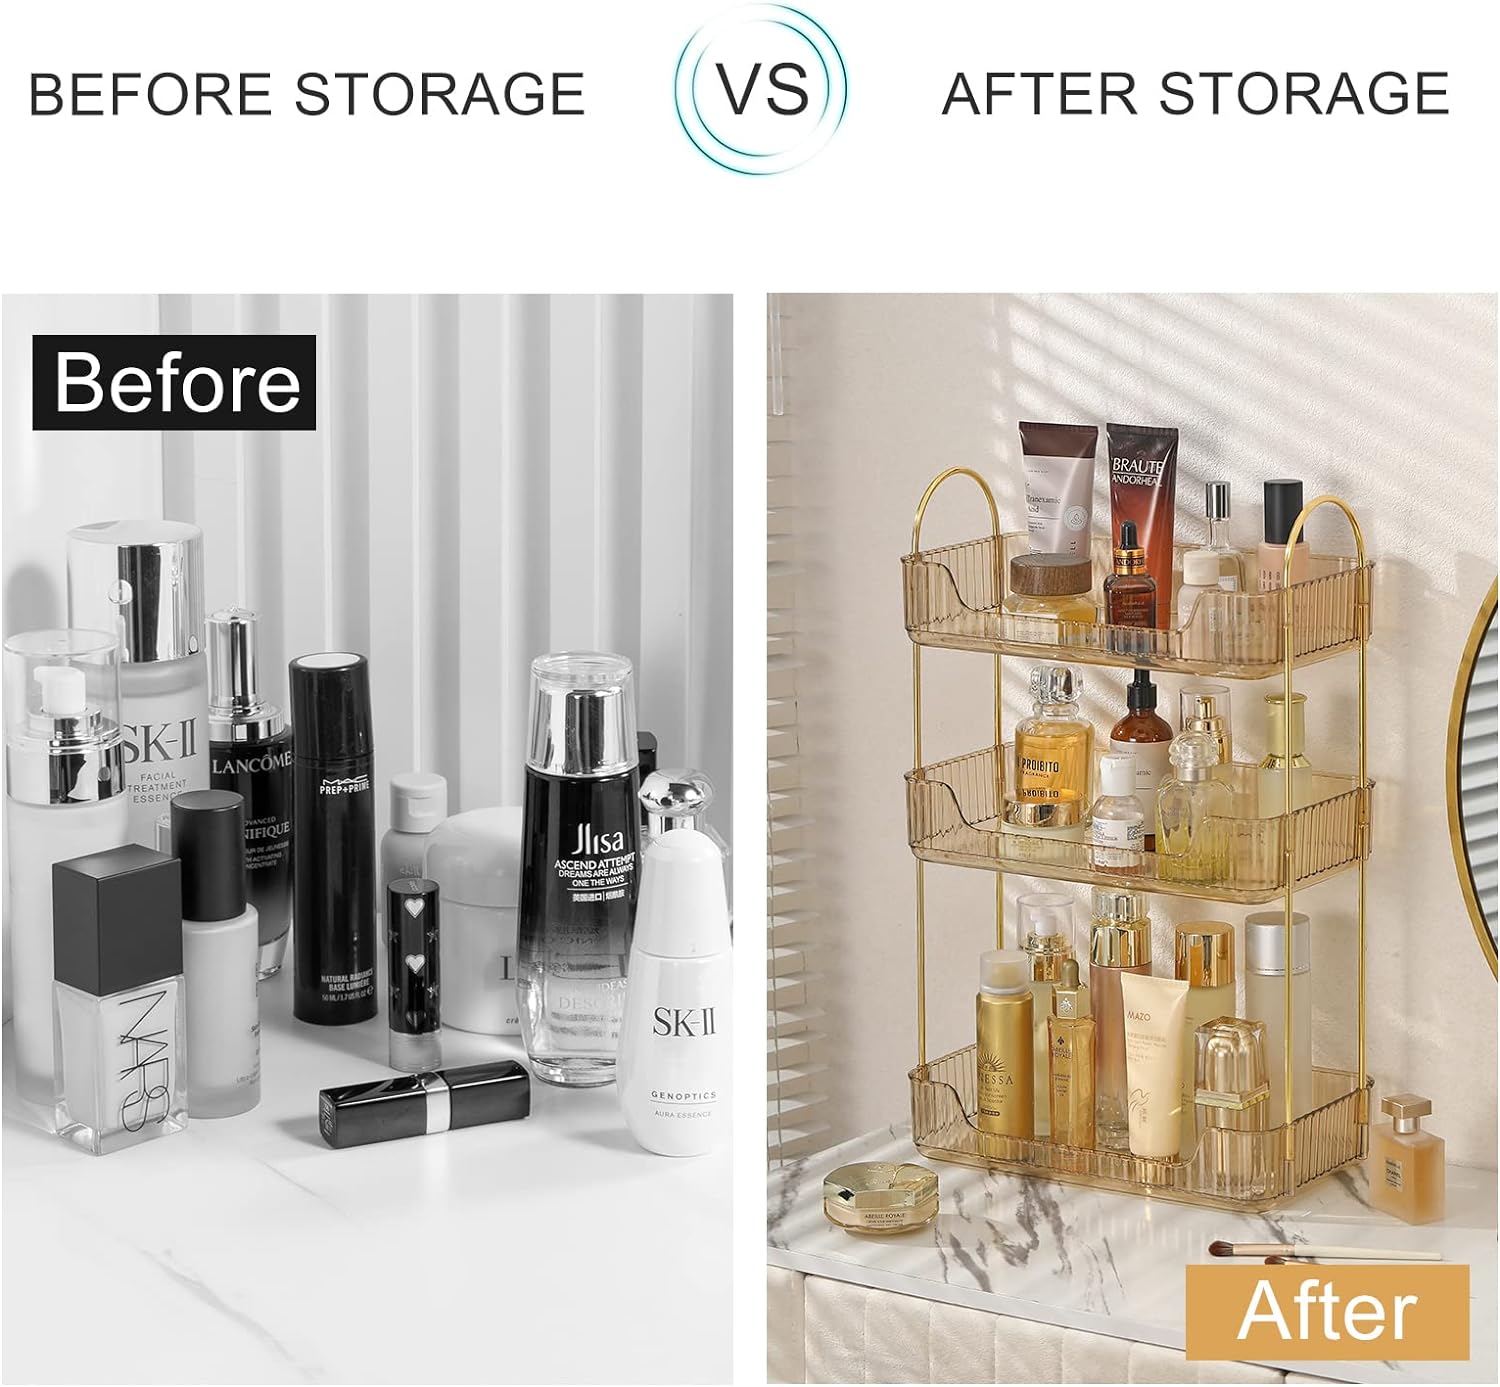 3 Layers Clear Acrylic Cosmetics Shelving